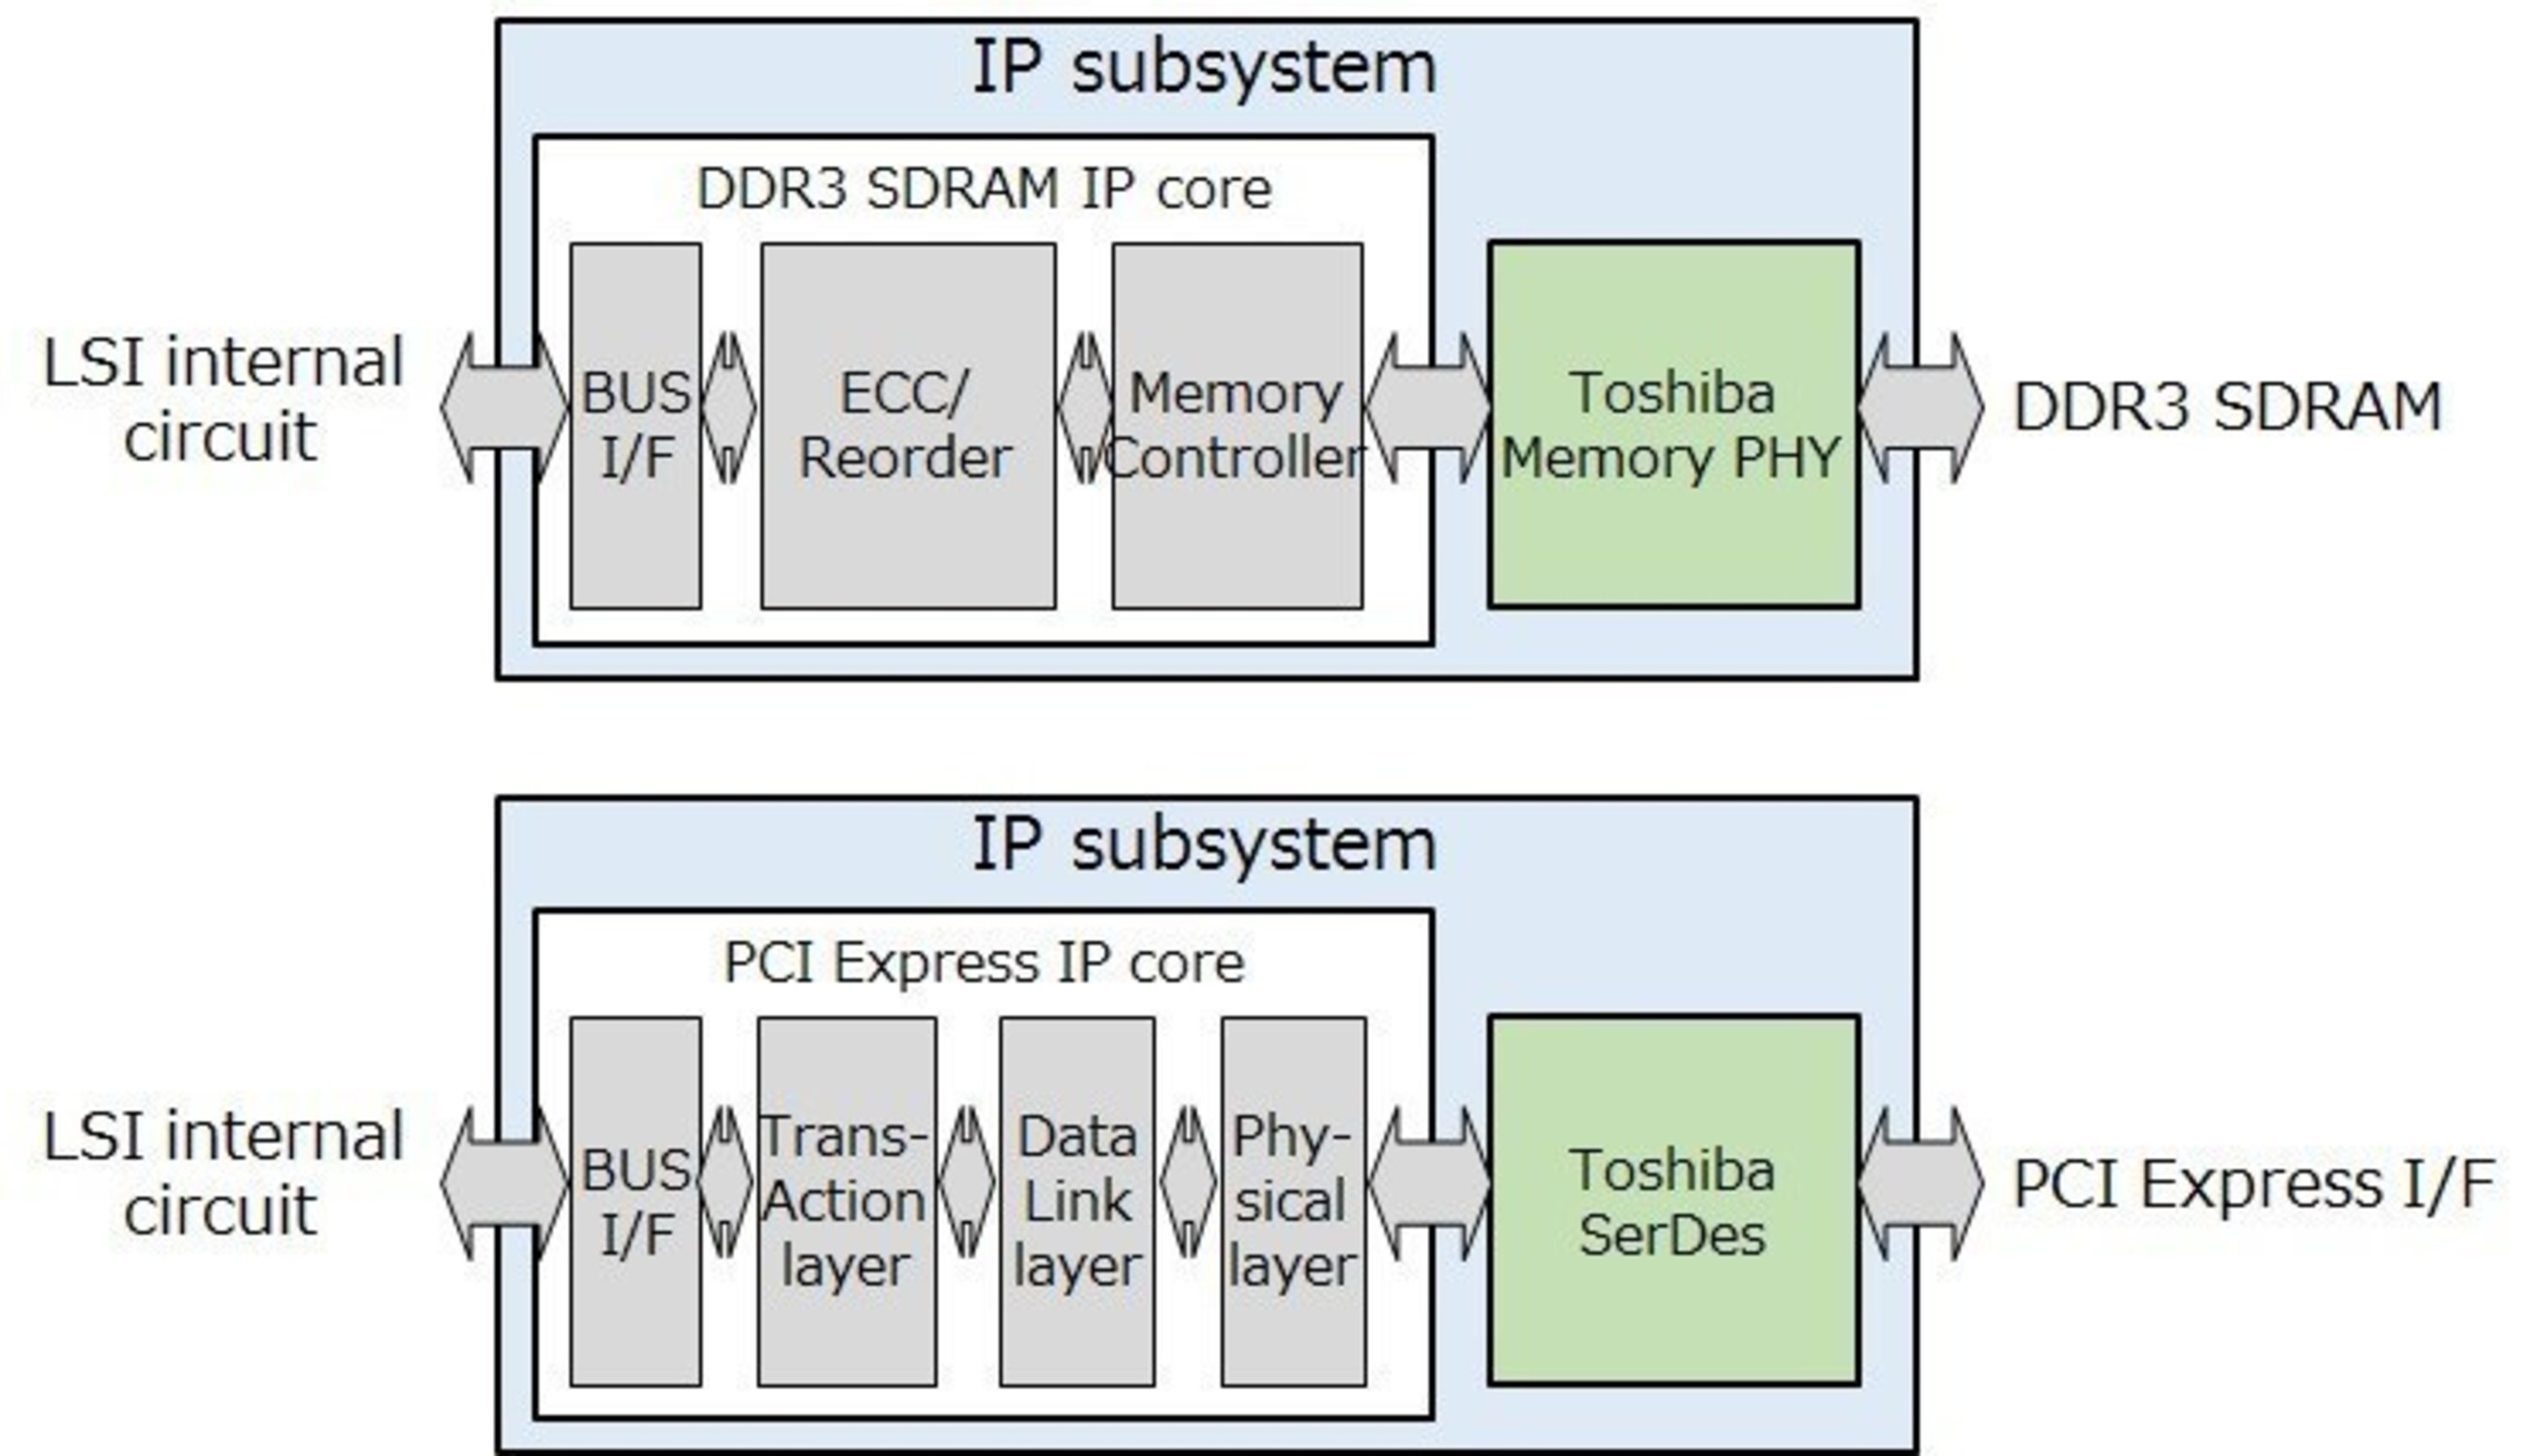 Toshiba's new DDR3 SDRAM and PCI Express IP subsystems incorporate IP cores from Northwest Logic.